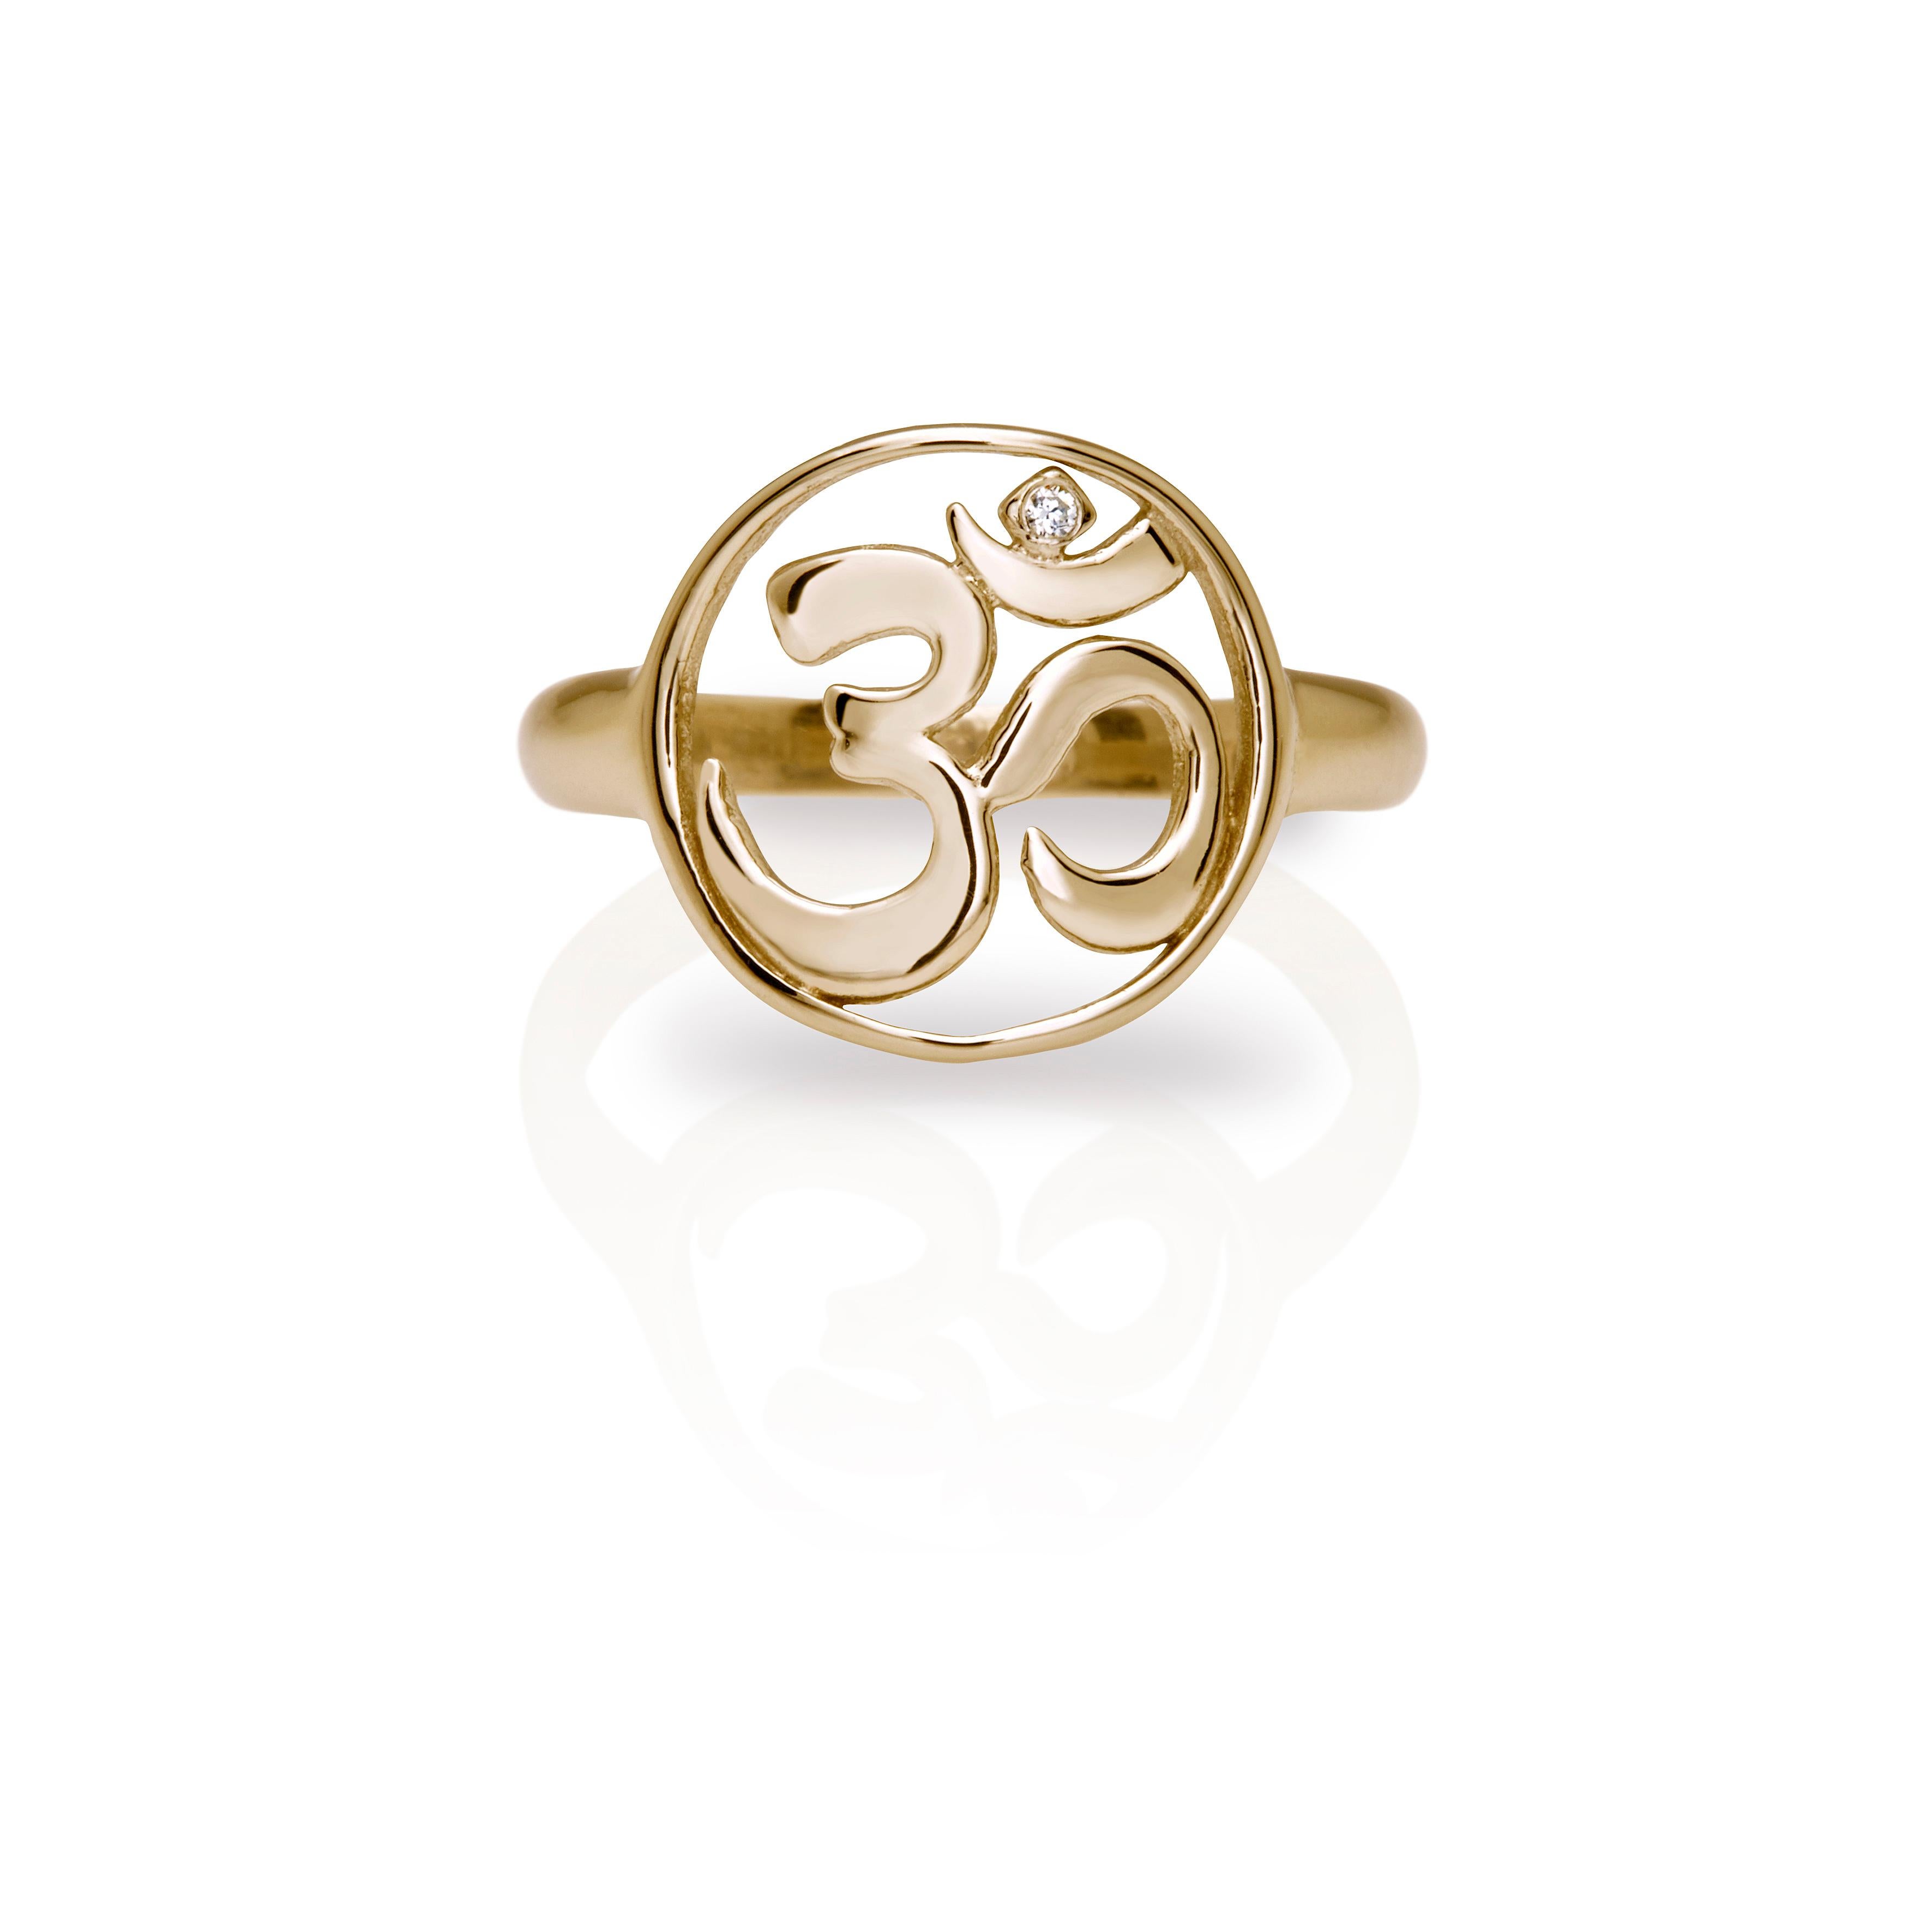 For Sale:  Handcrafted Yoga Ring with Om Aum Symbol in 14Kt Gold and Brilliant Cut Diamond 3